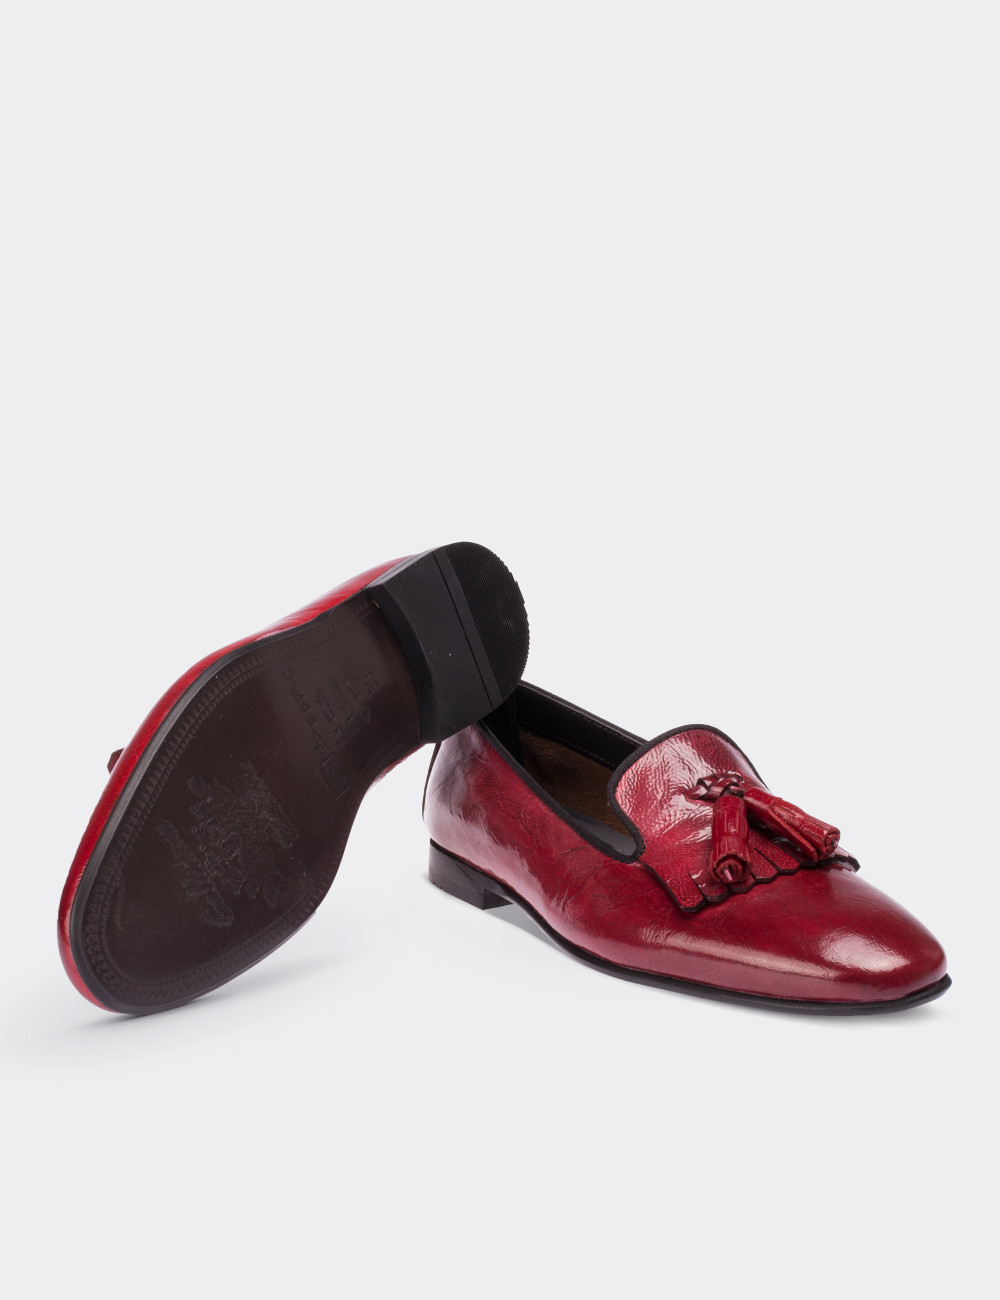 Burgundy Patent Leather Loafers - 01612ZBRDM01